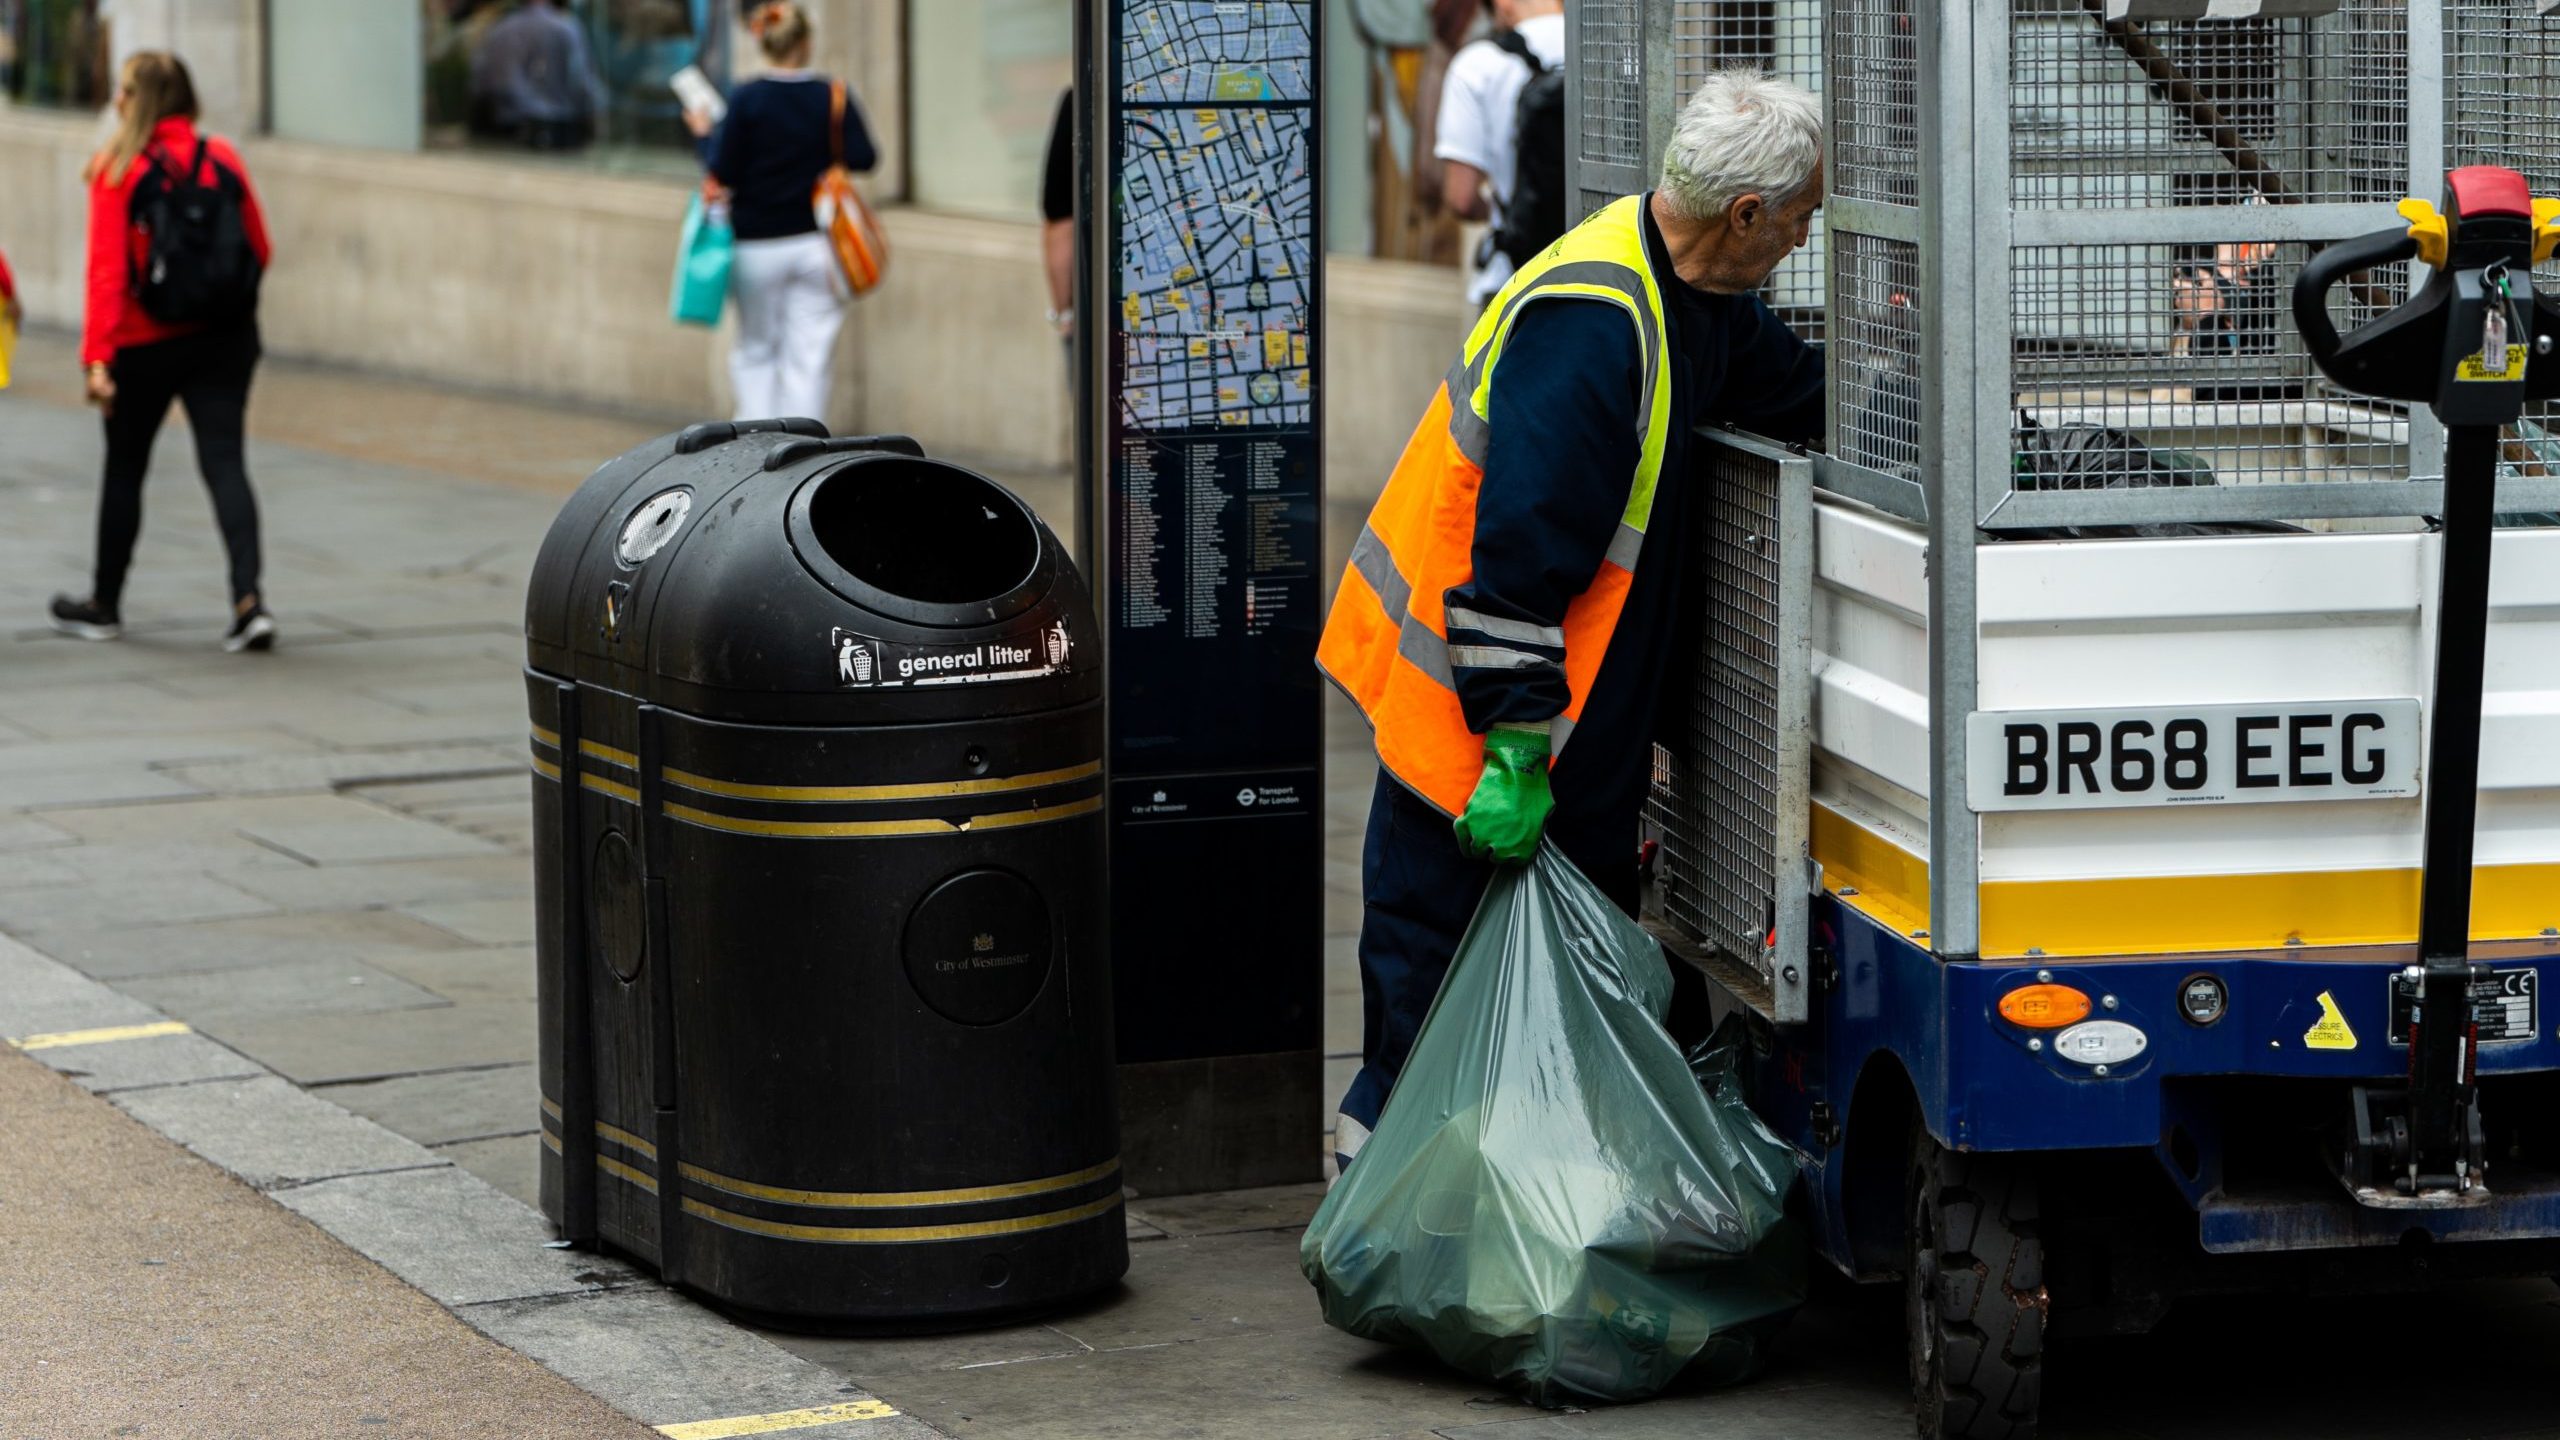 A street cleaner collects a bag of waste from a public bin.